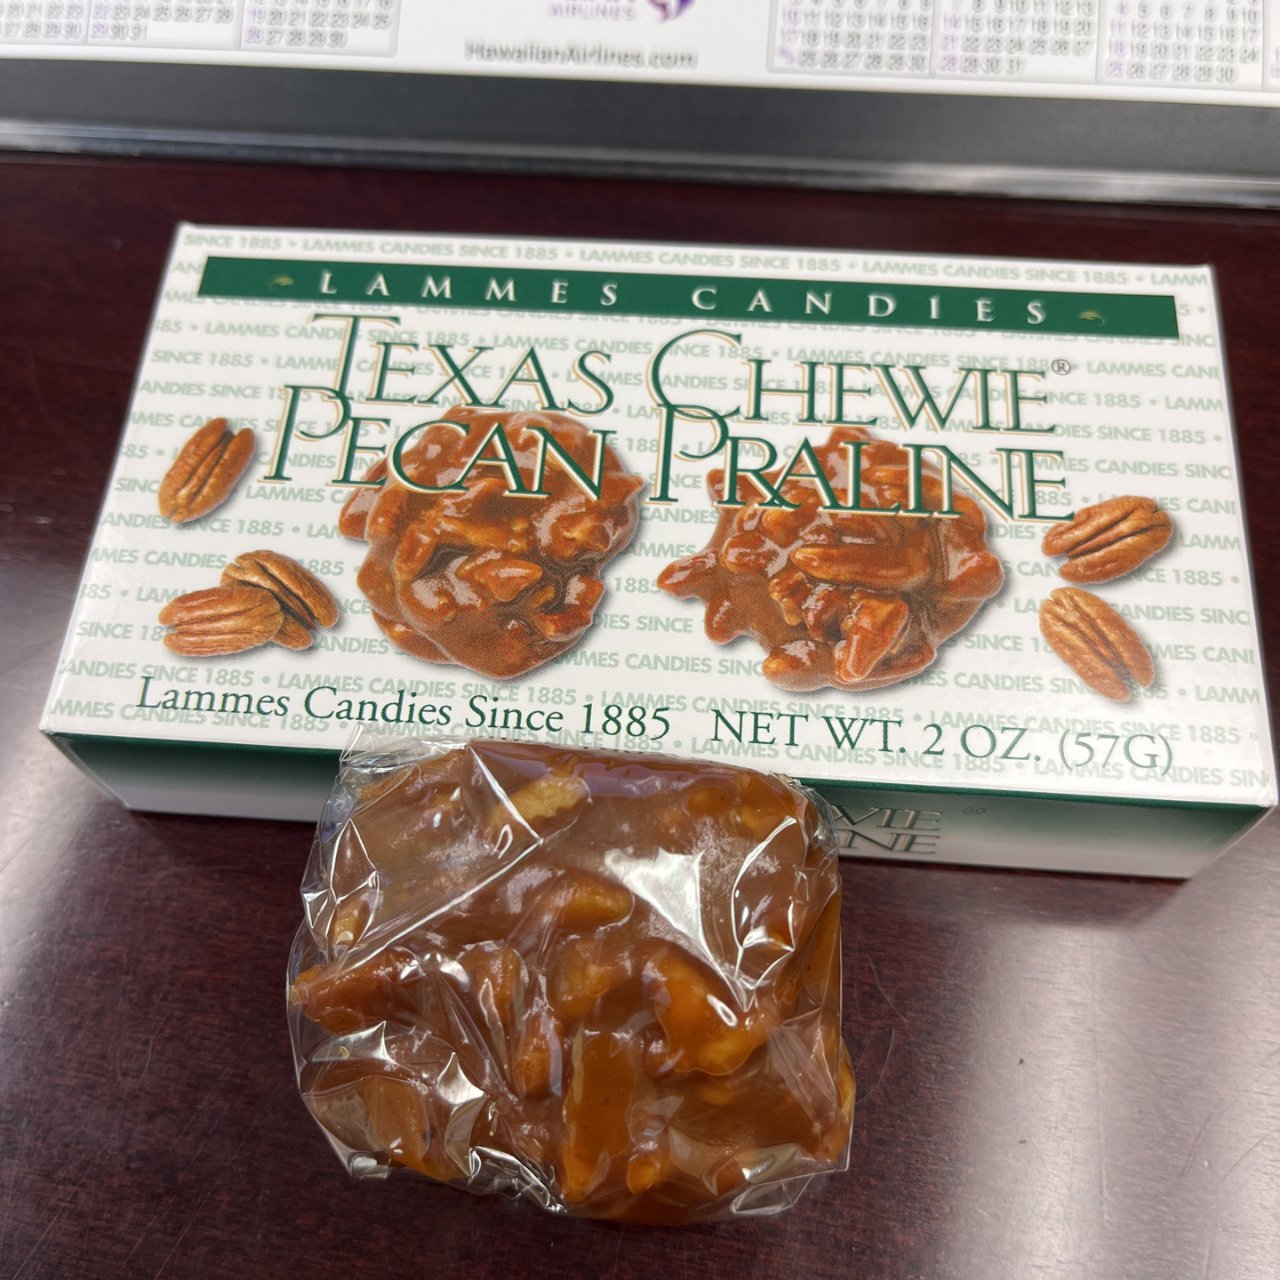 Lammes Texas Chewie Pecan Praline Candies - 6 Ounce Box of the Original Chewy Caramel Candy : Grocery & Gourmet Food